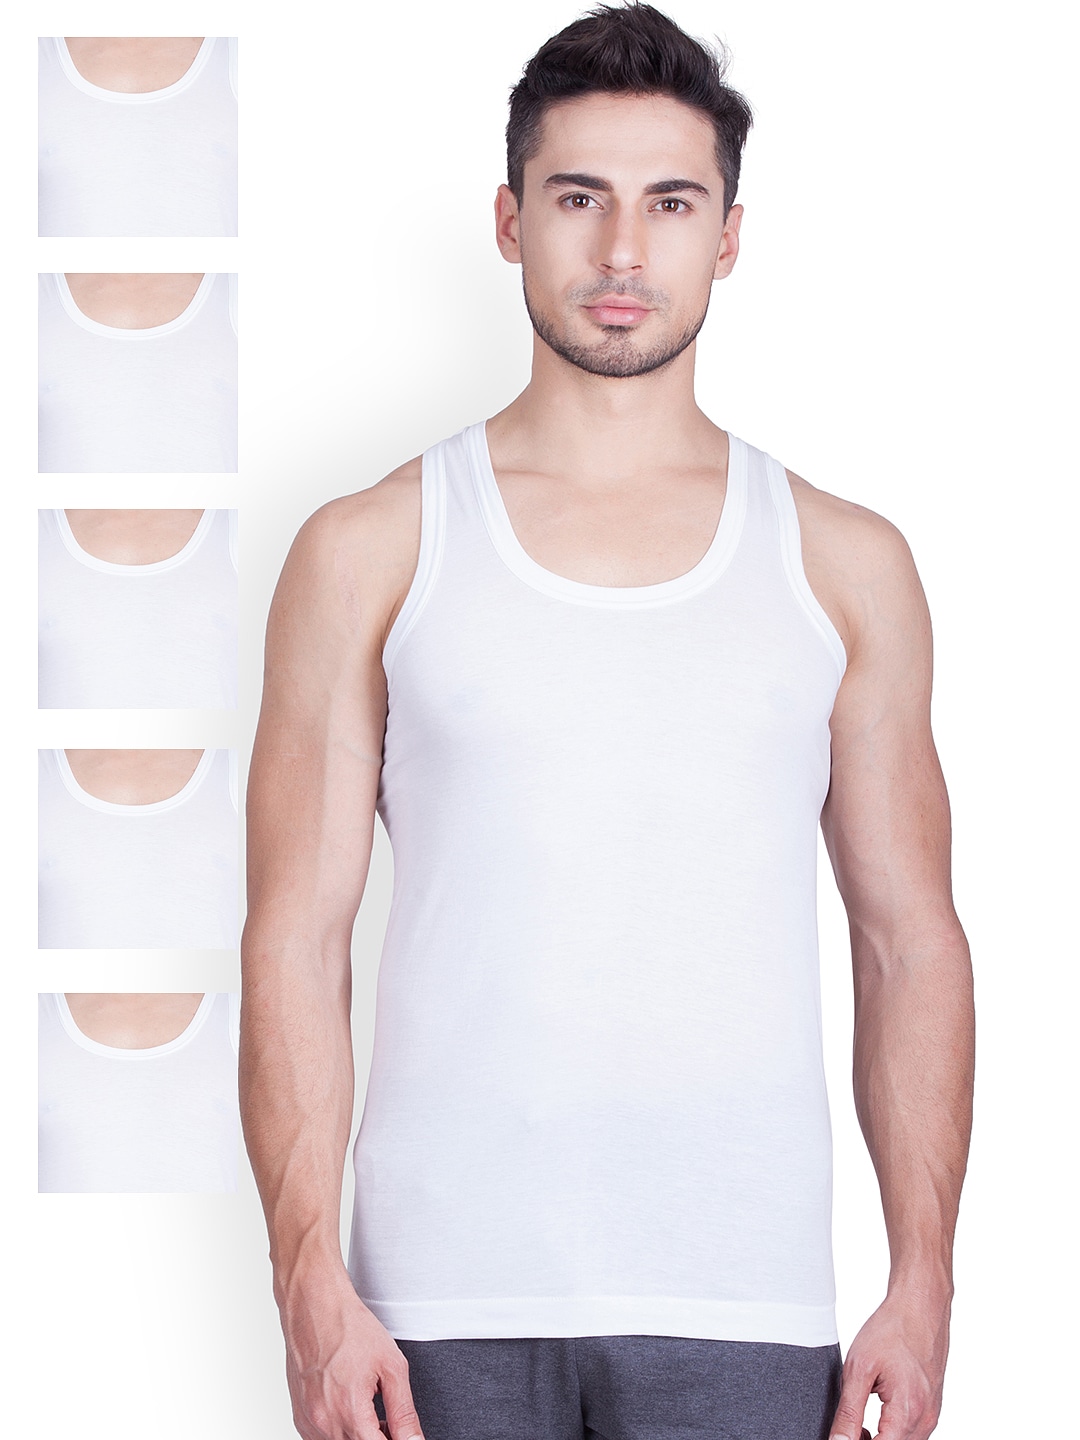 Clothing Innerwear Vests | Lux Cozi Pack of 6 Innerwear Vests COZI_GLO_WH_90 - HW56627